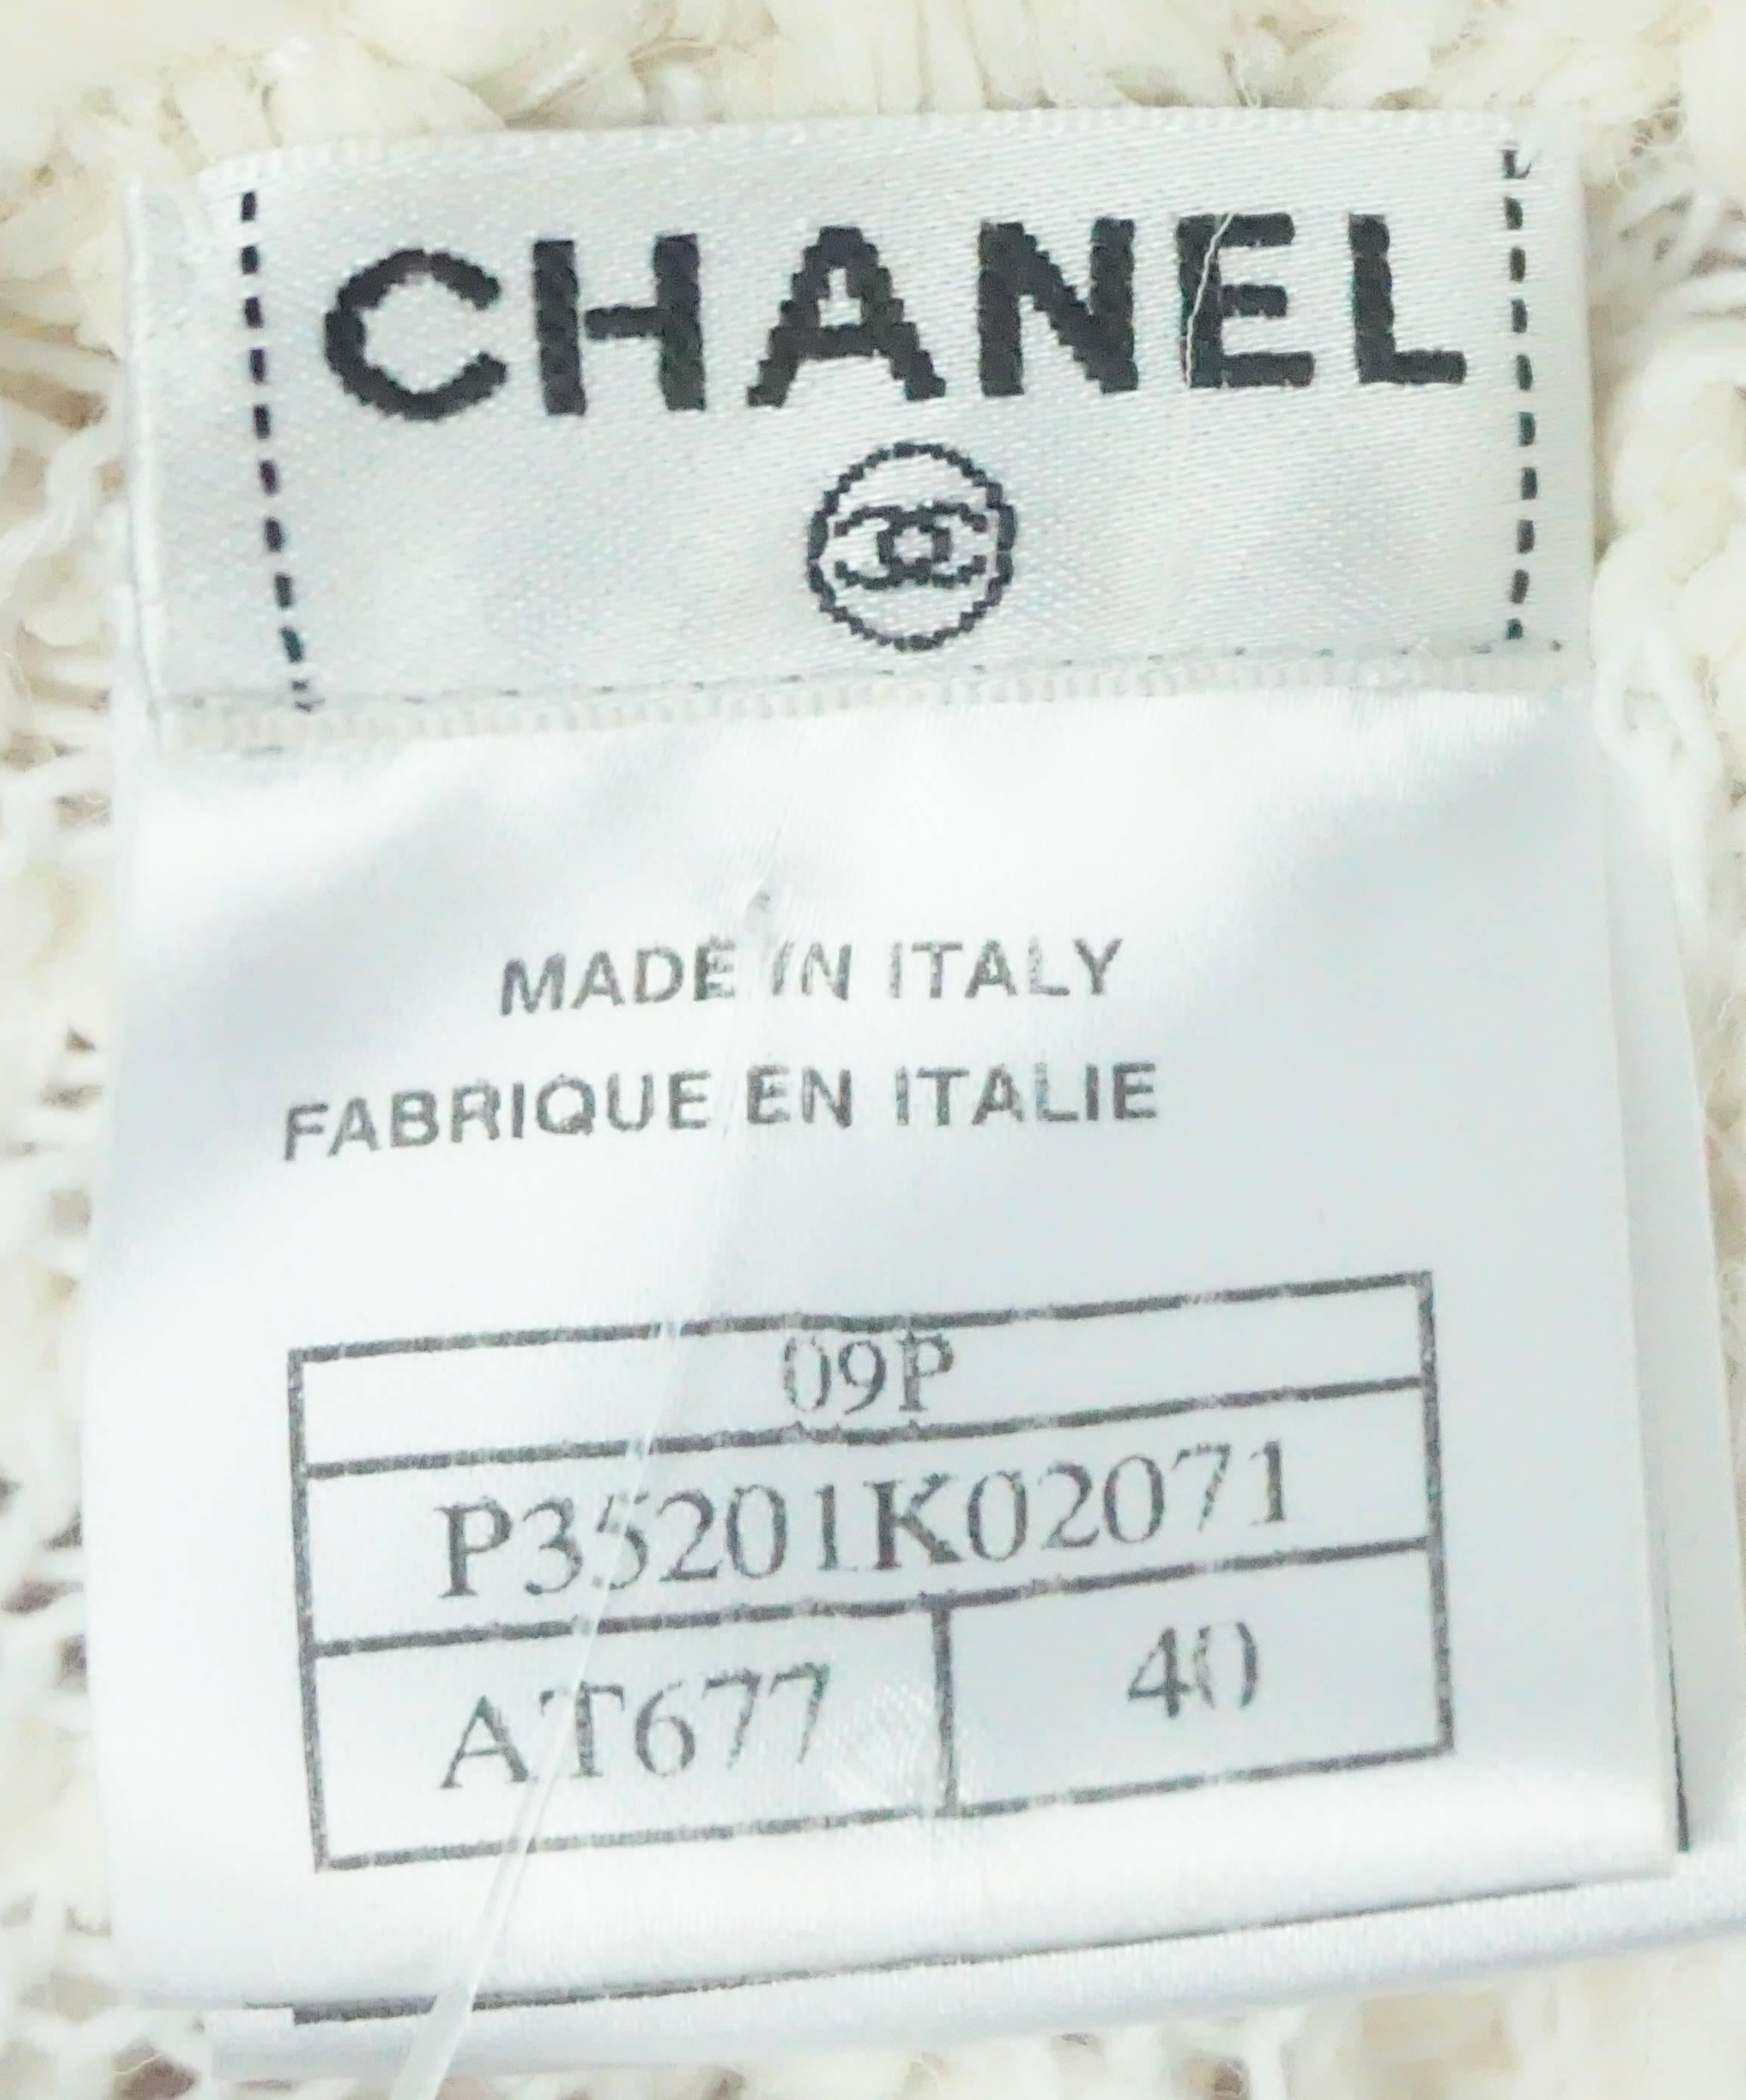 Women's Chanel Ivory Silk and Cotton Crochet Knit Top with Pearl Detail - 40- 09P